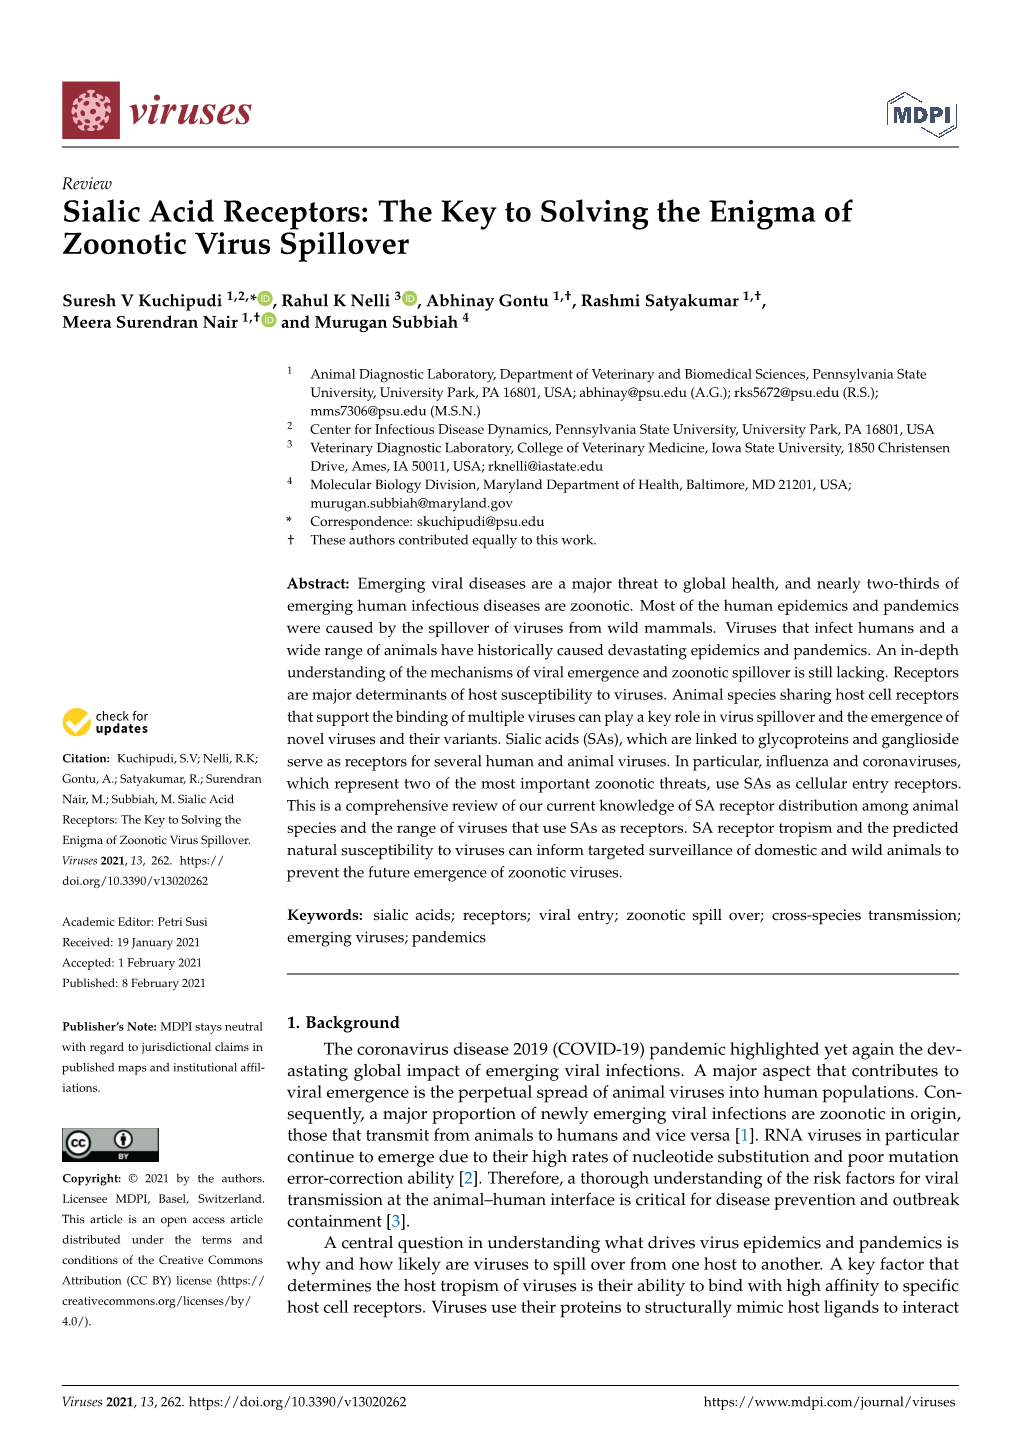 Sialic Acid Receptors: the Key to Solving the Enigma of Zoonotic Virus Spillover